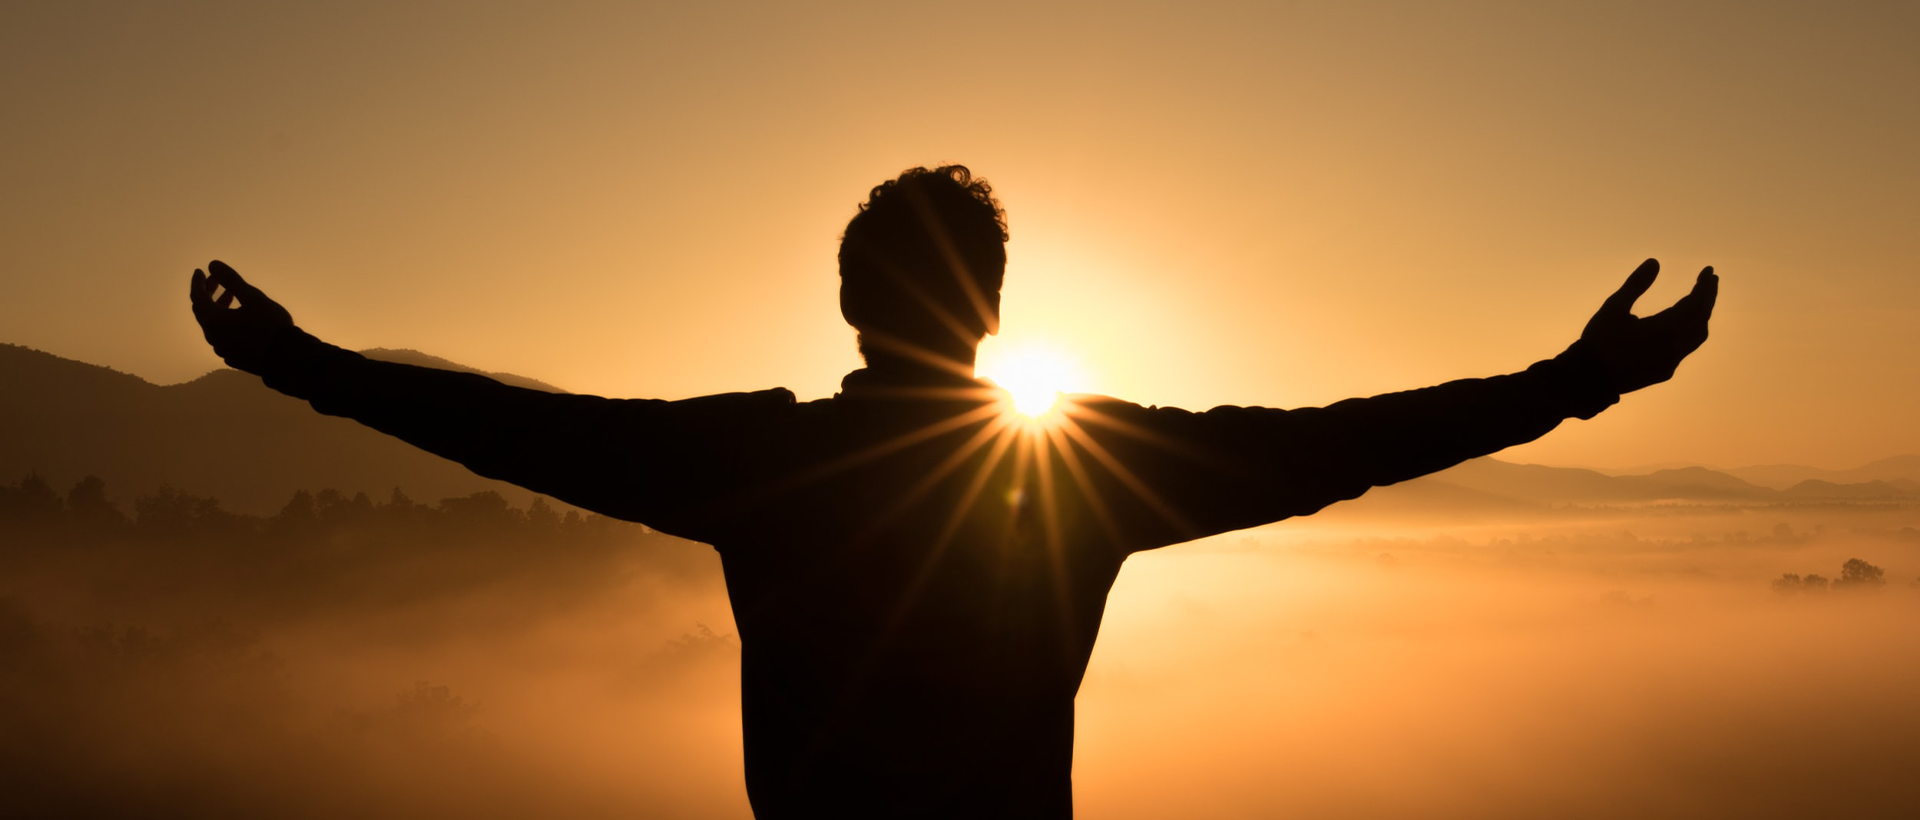 a man standing in front of the sun with his arms outstretched.